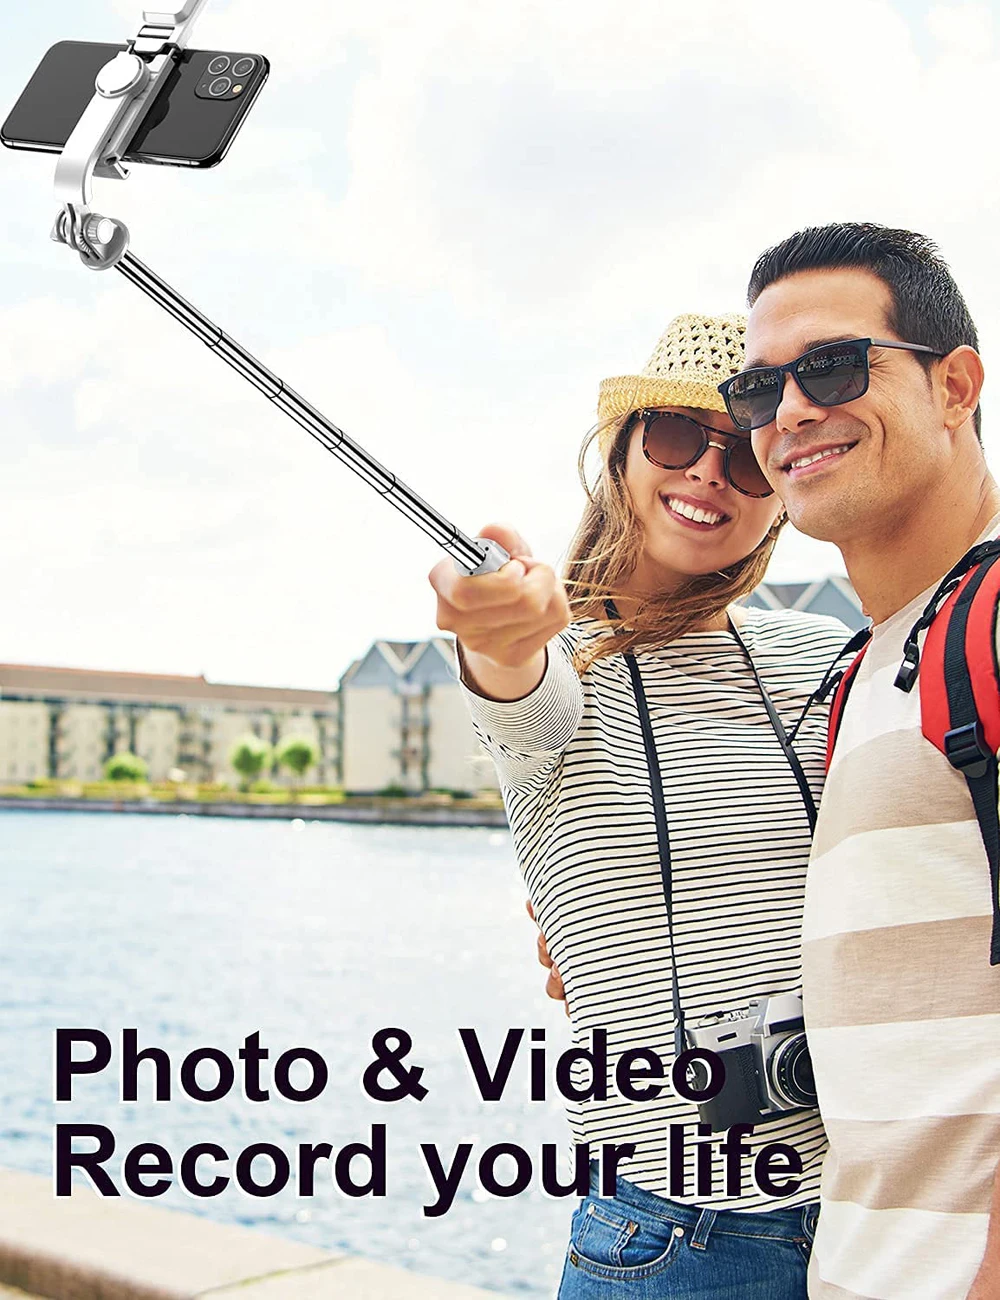 Wireless Bluetooth Selfie Stick Foldable Portable Tripod with Fill Light Shutter Remote Control for Android iPhone Smartphone images - 6